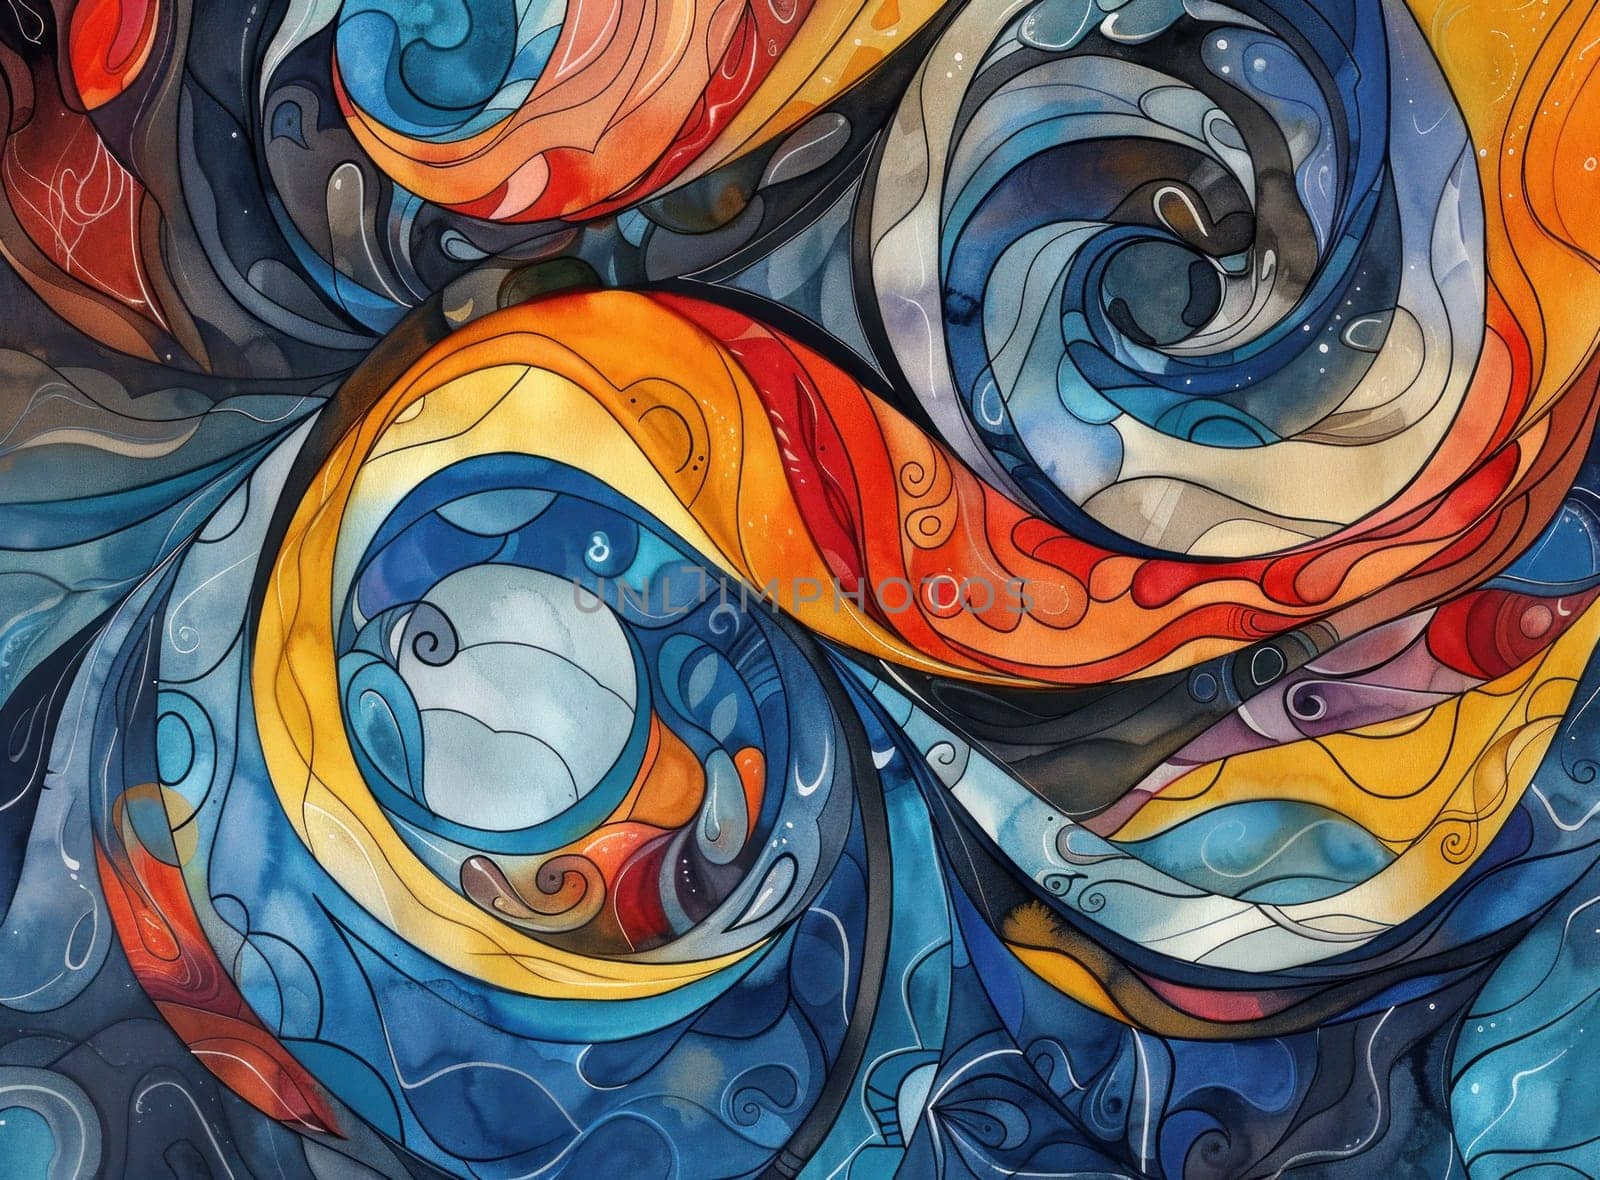 Colorful abstract painting with swirls of blue, orange and yellow representing vibrant artistry and creativity in modern design